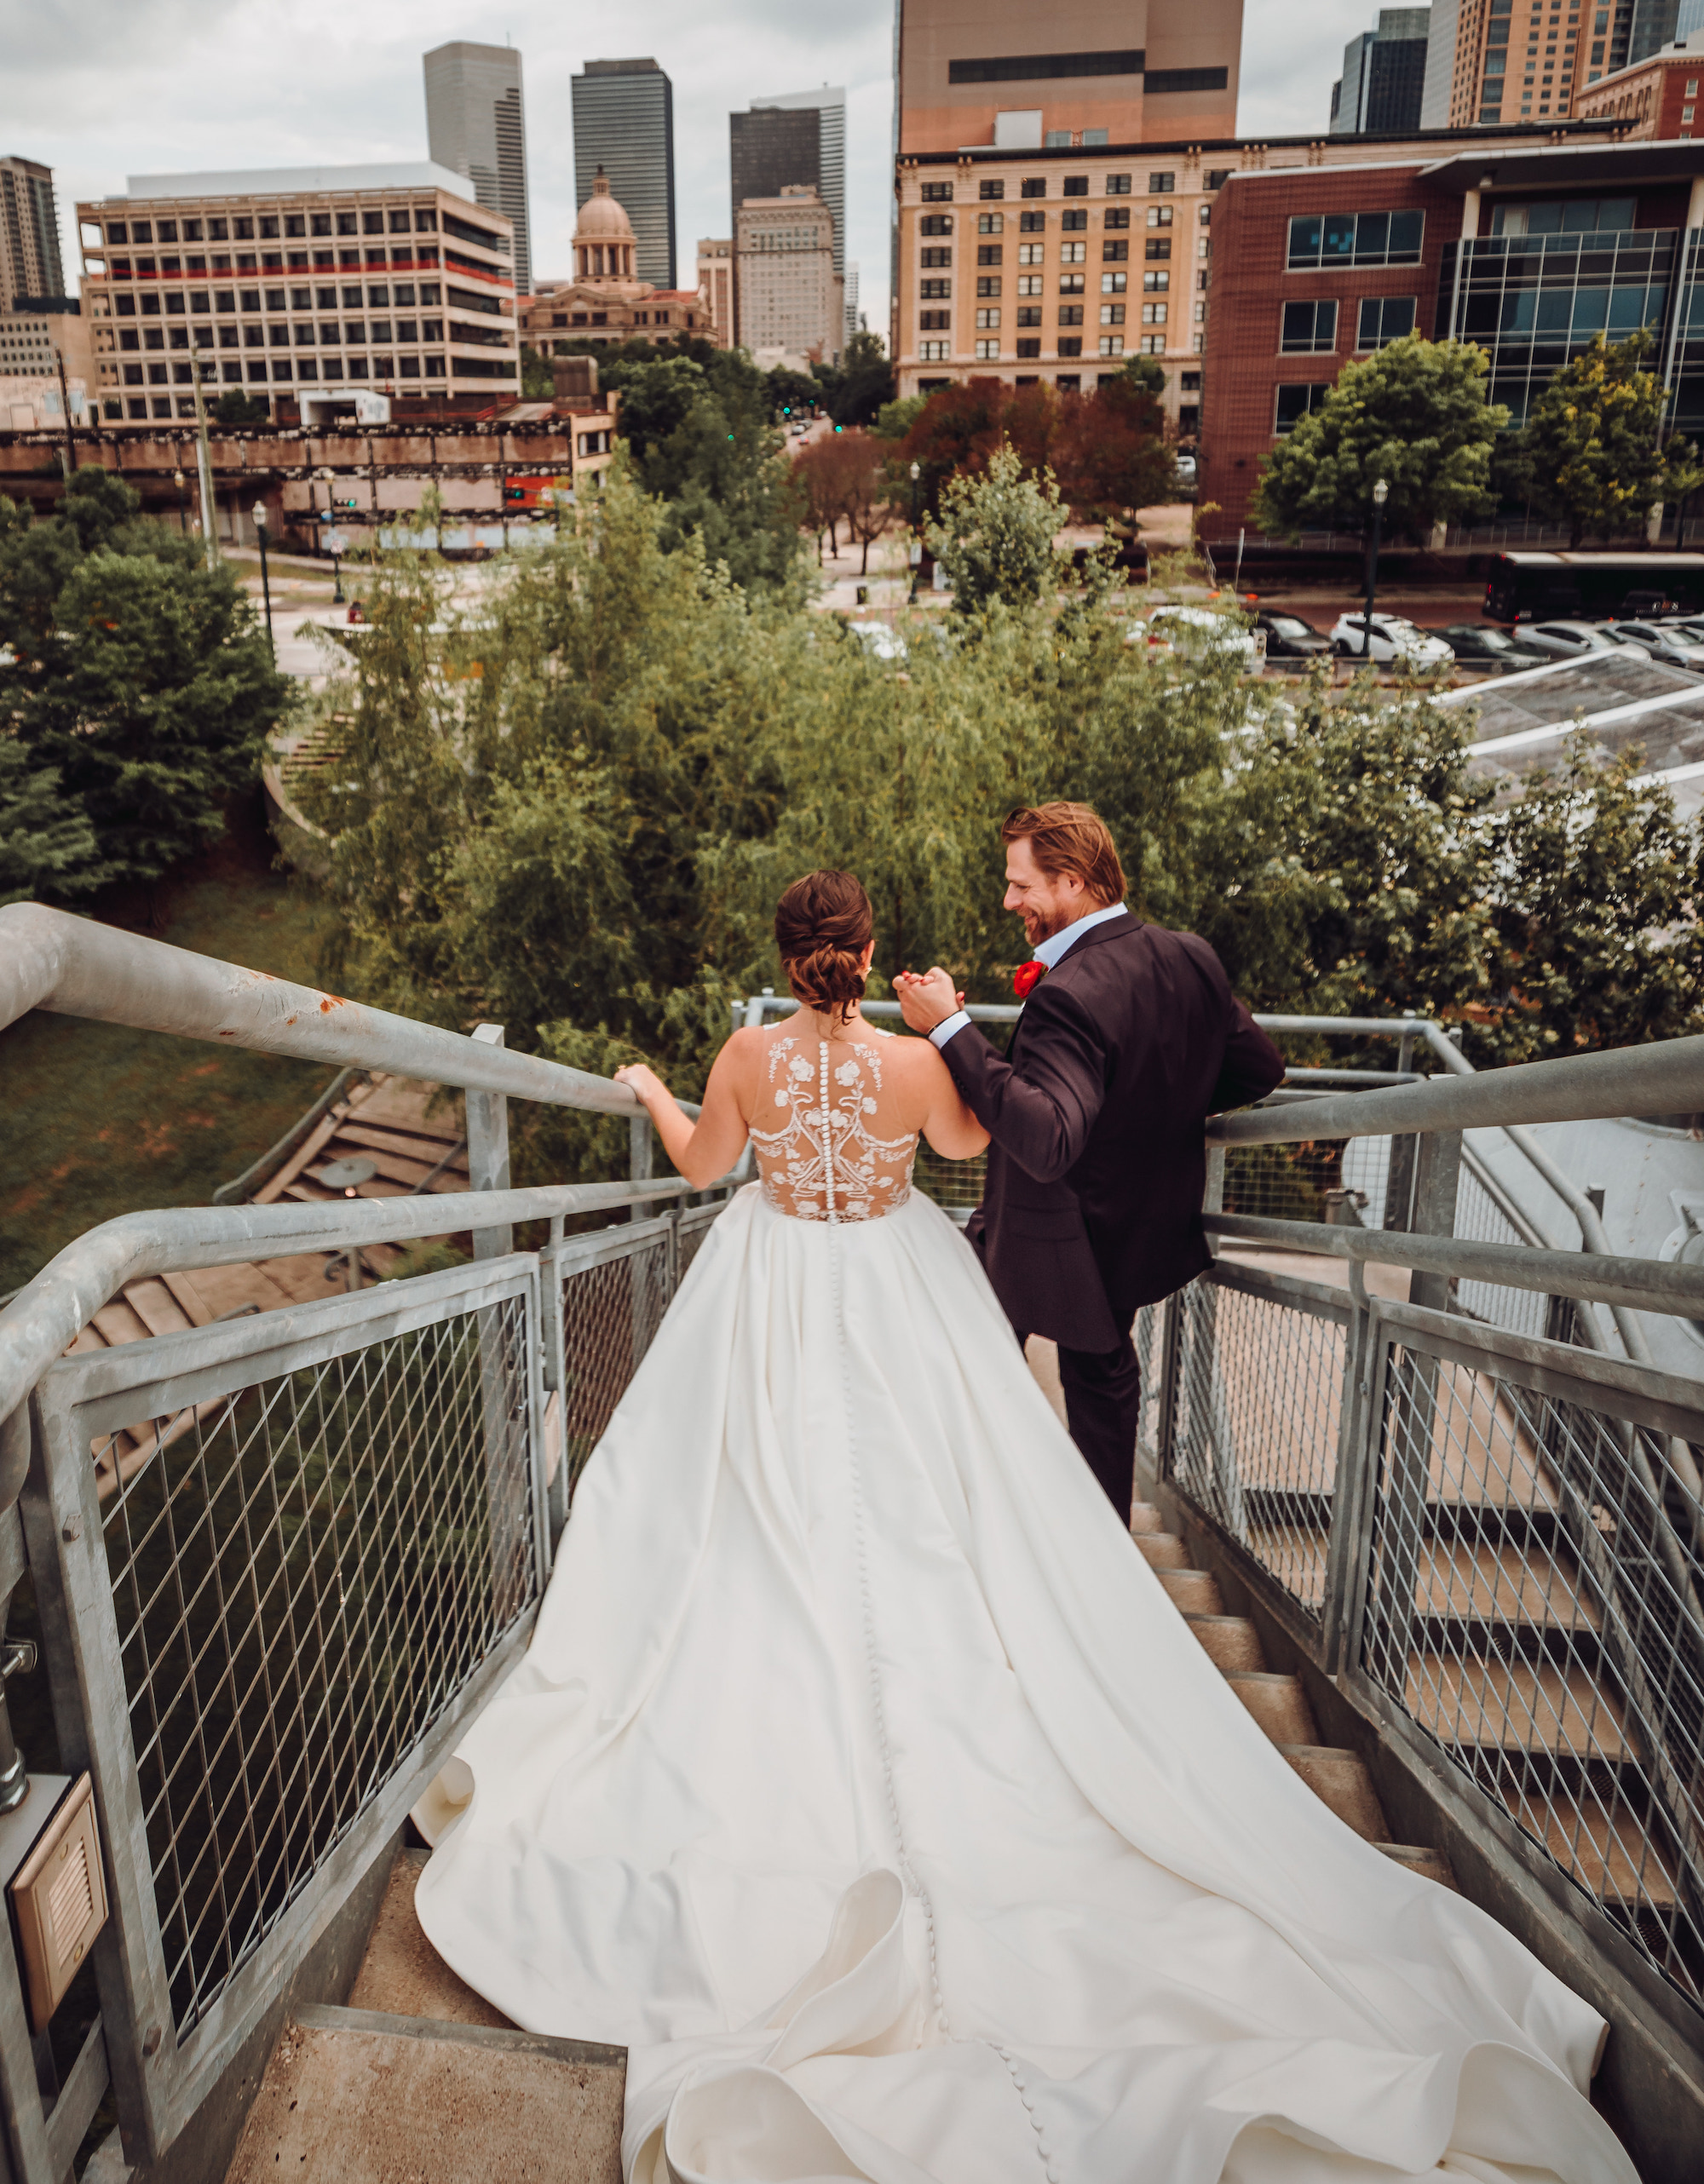 A groom holds his bride's hand as they walk down the stairs with Houston skyscrapers in the background.